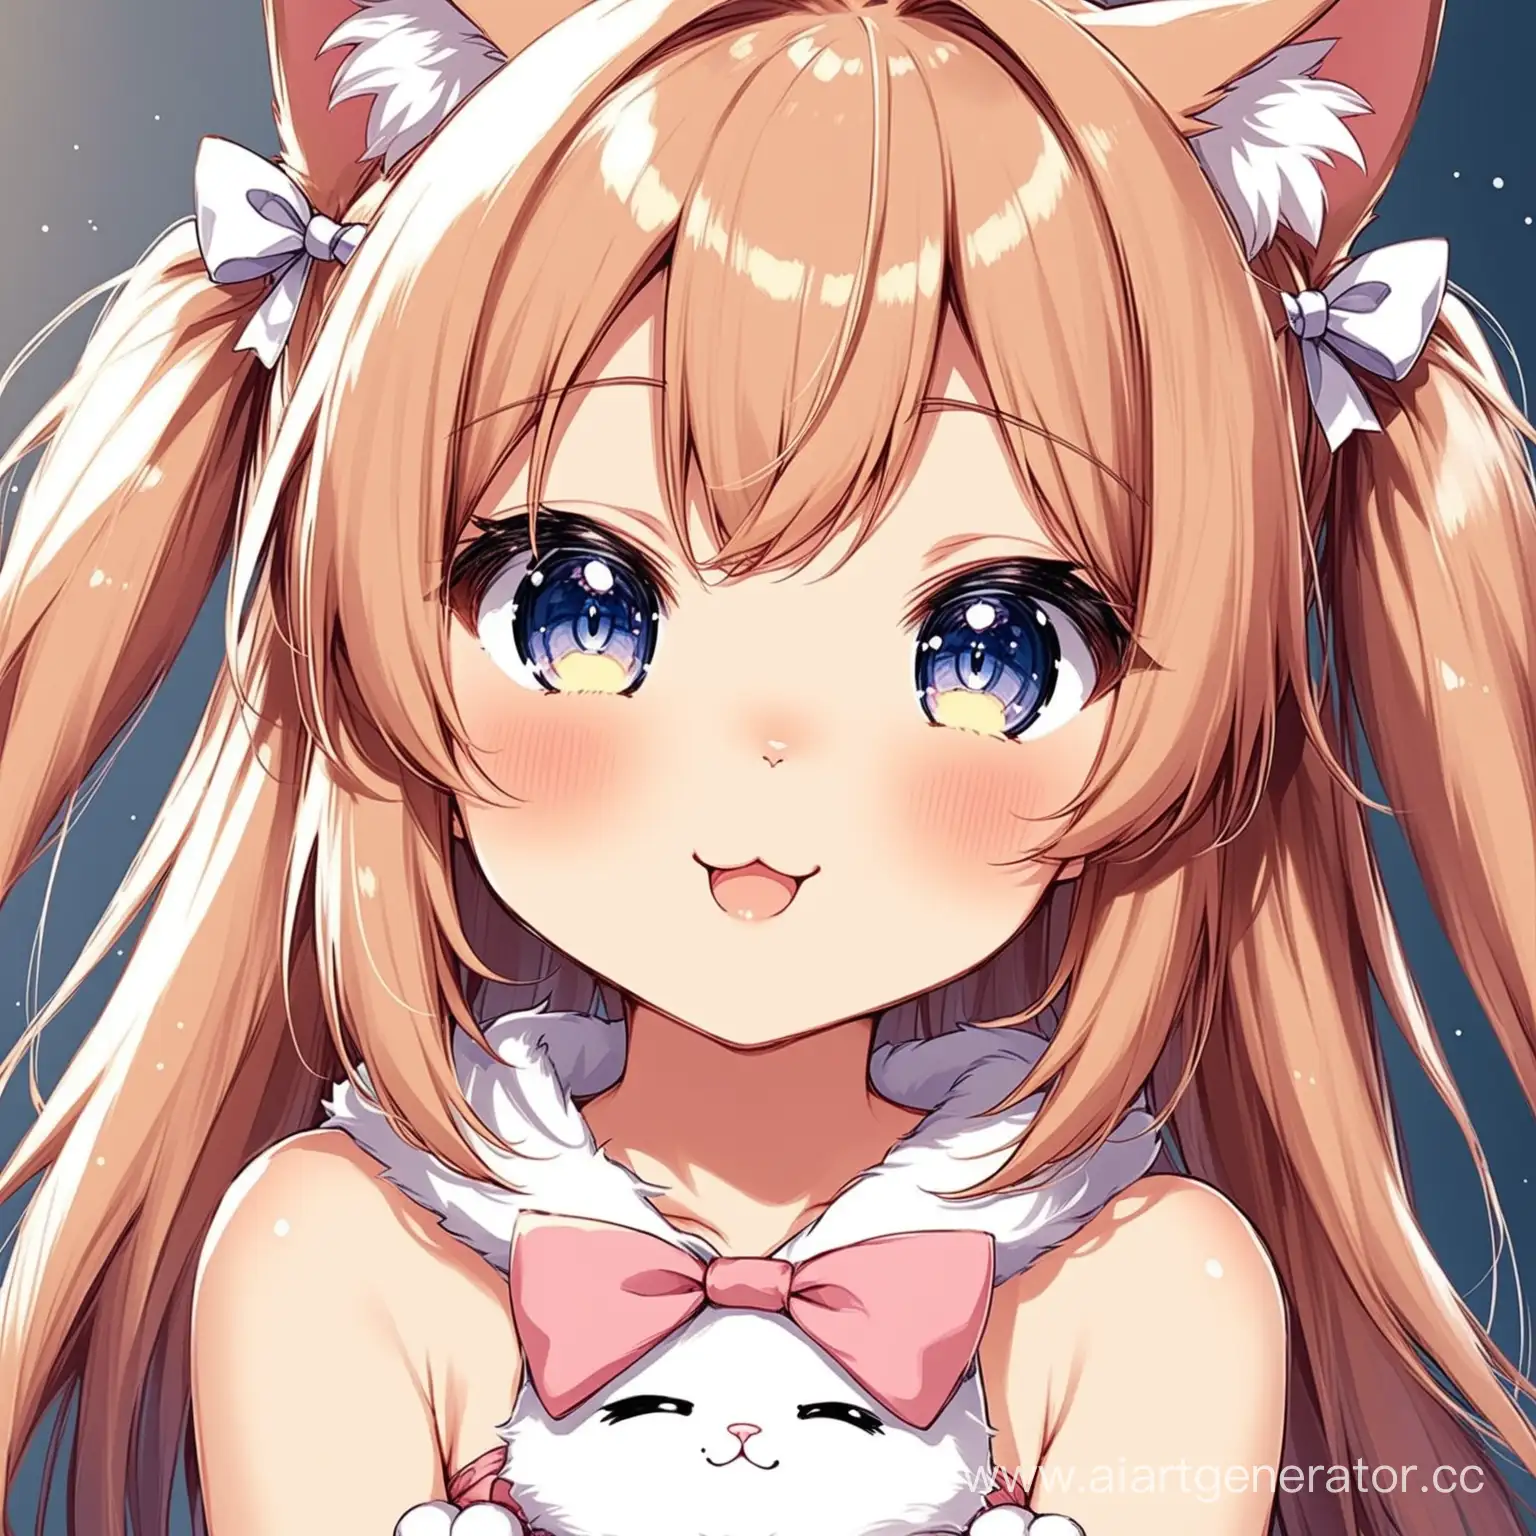 Adorable-Anime-CatGirl-Character-with-Playful-Expression